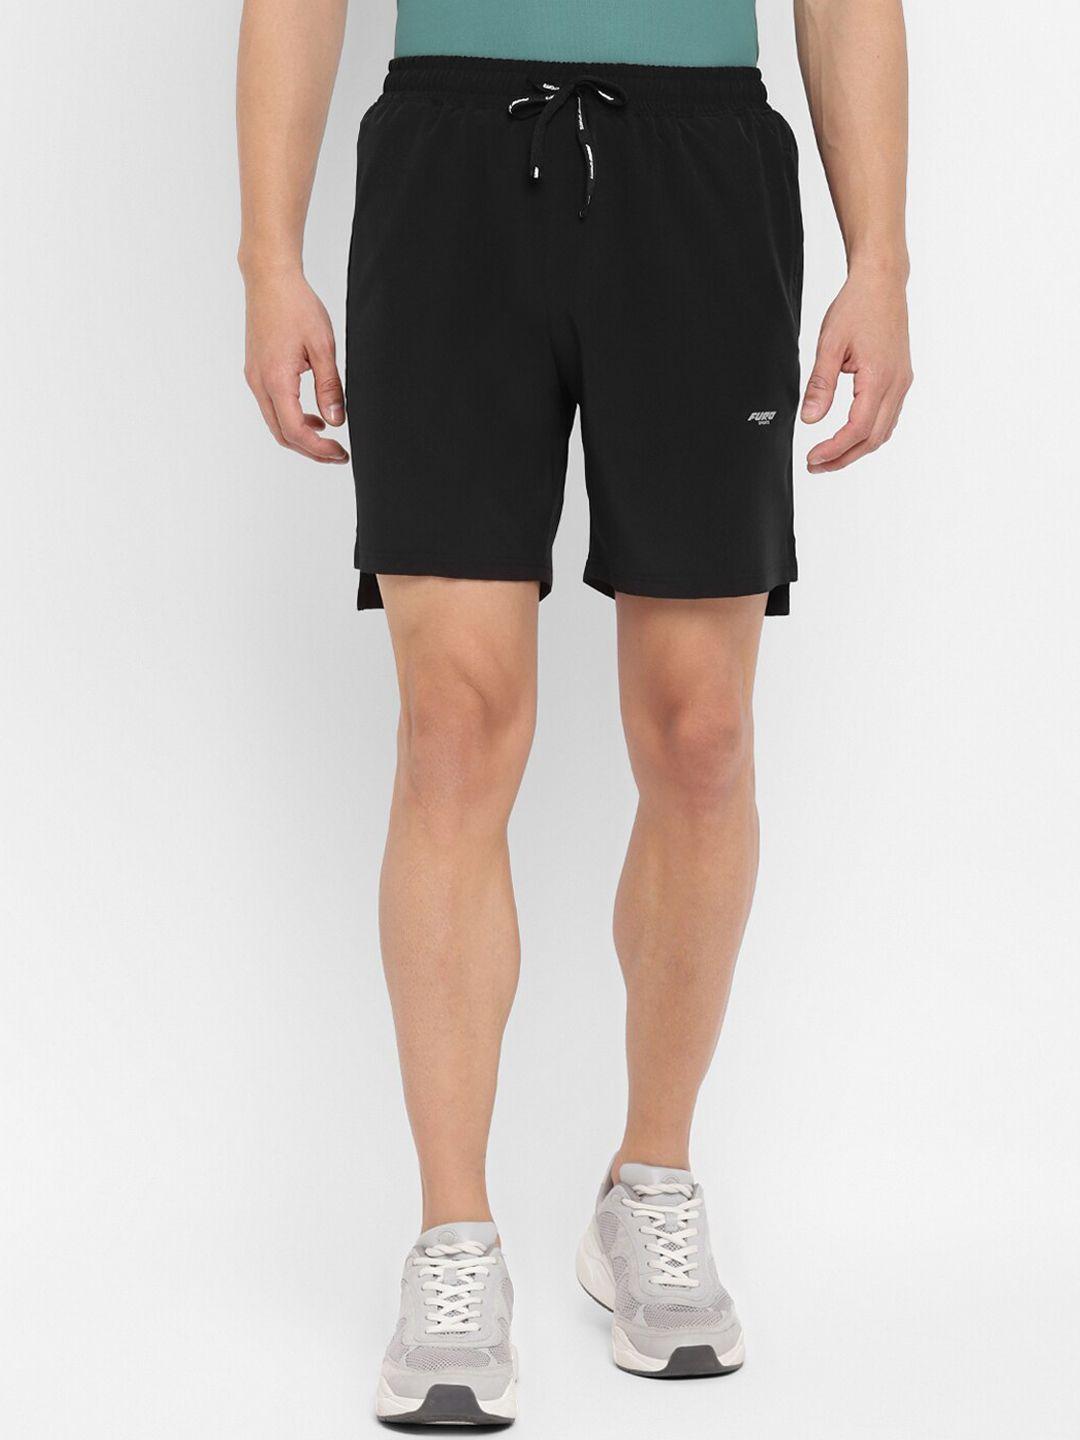 furo-by-red-chief-men-mid-rise-training-or-gym-sports-shorts